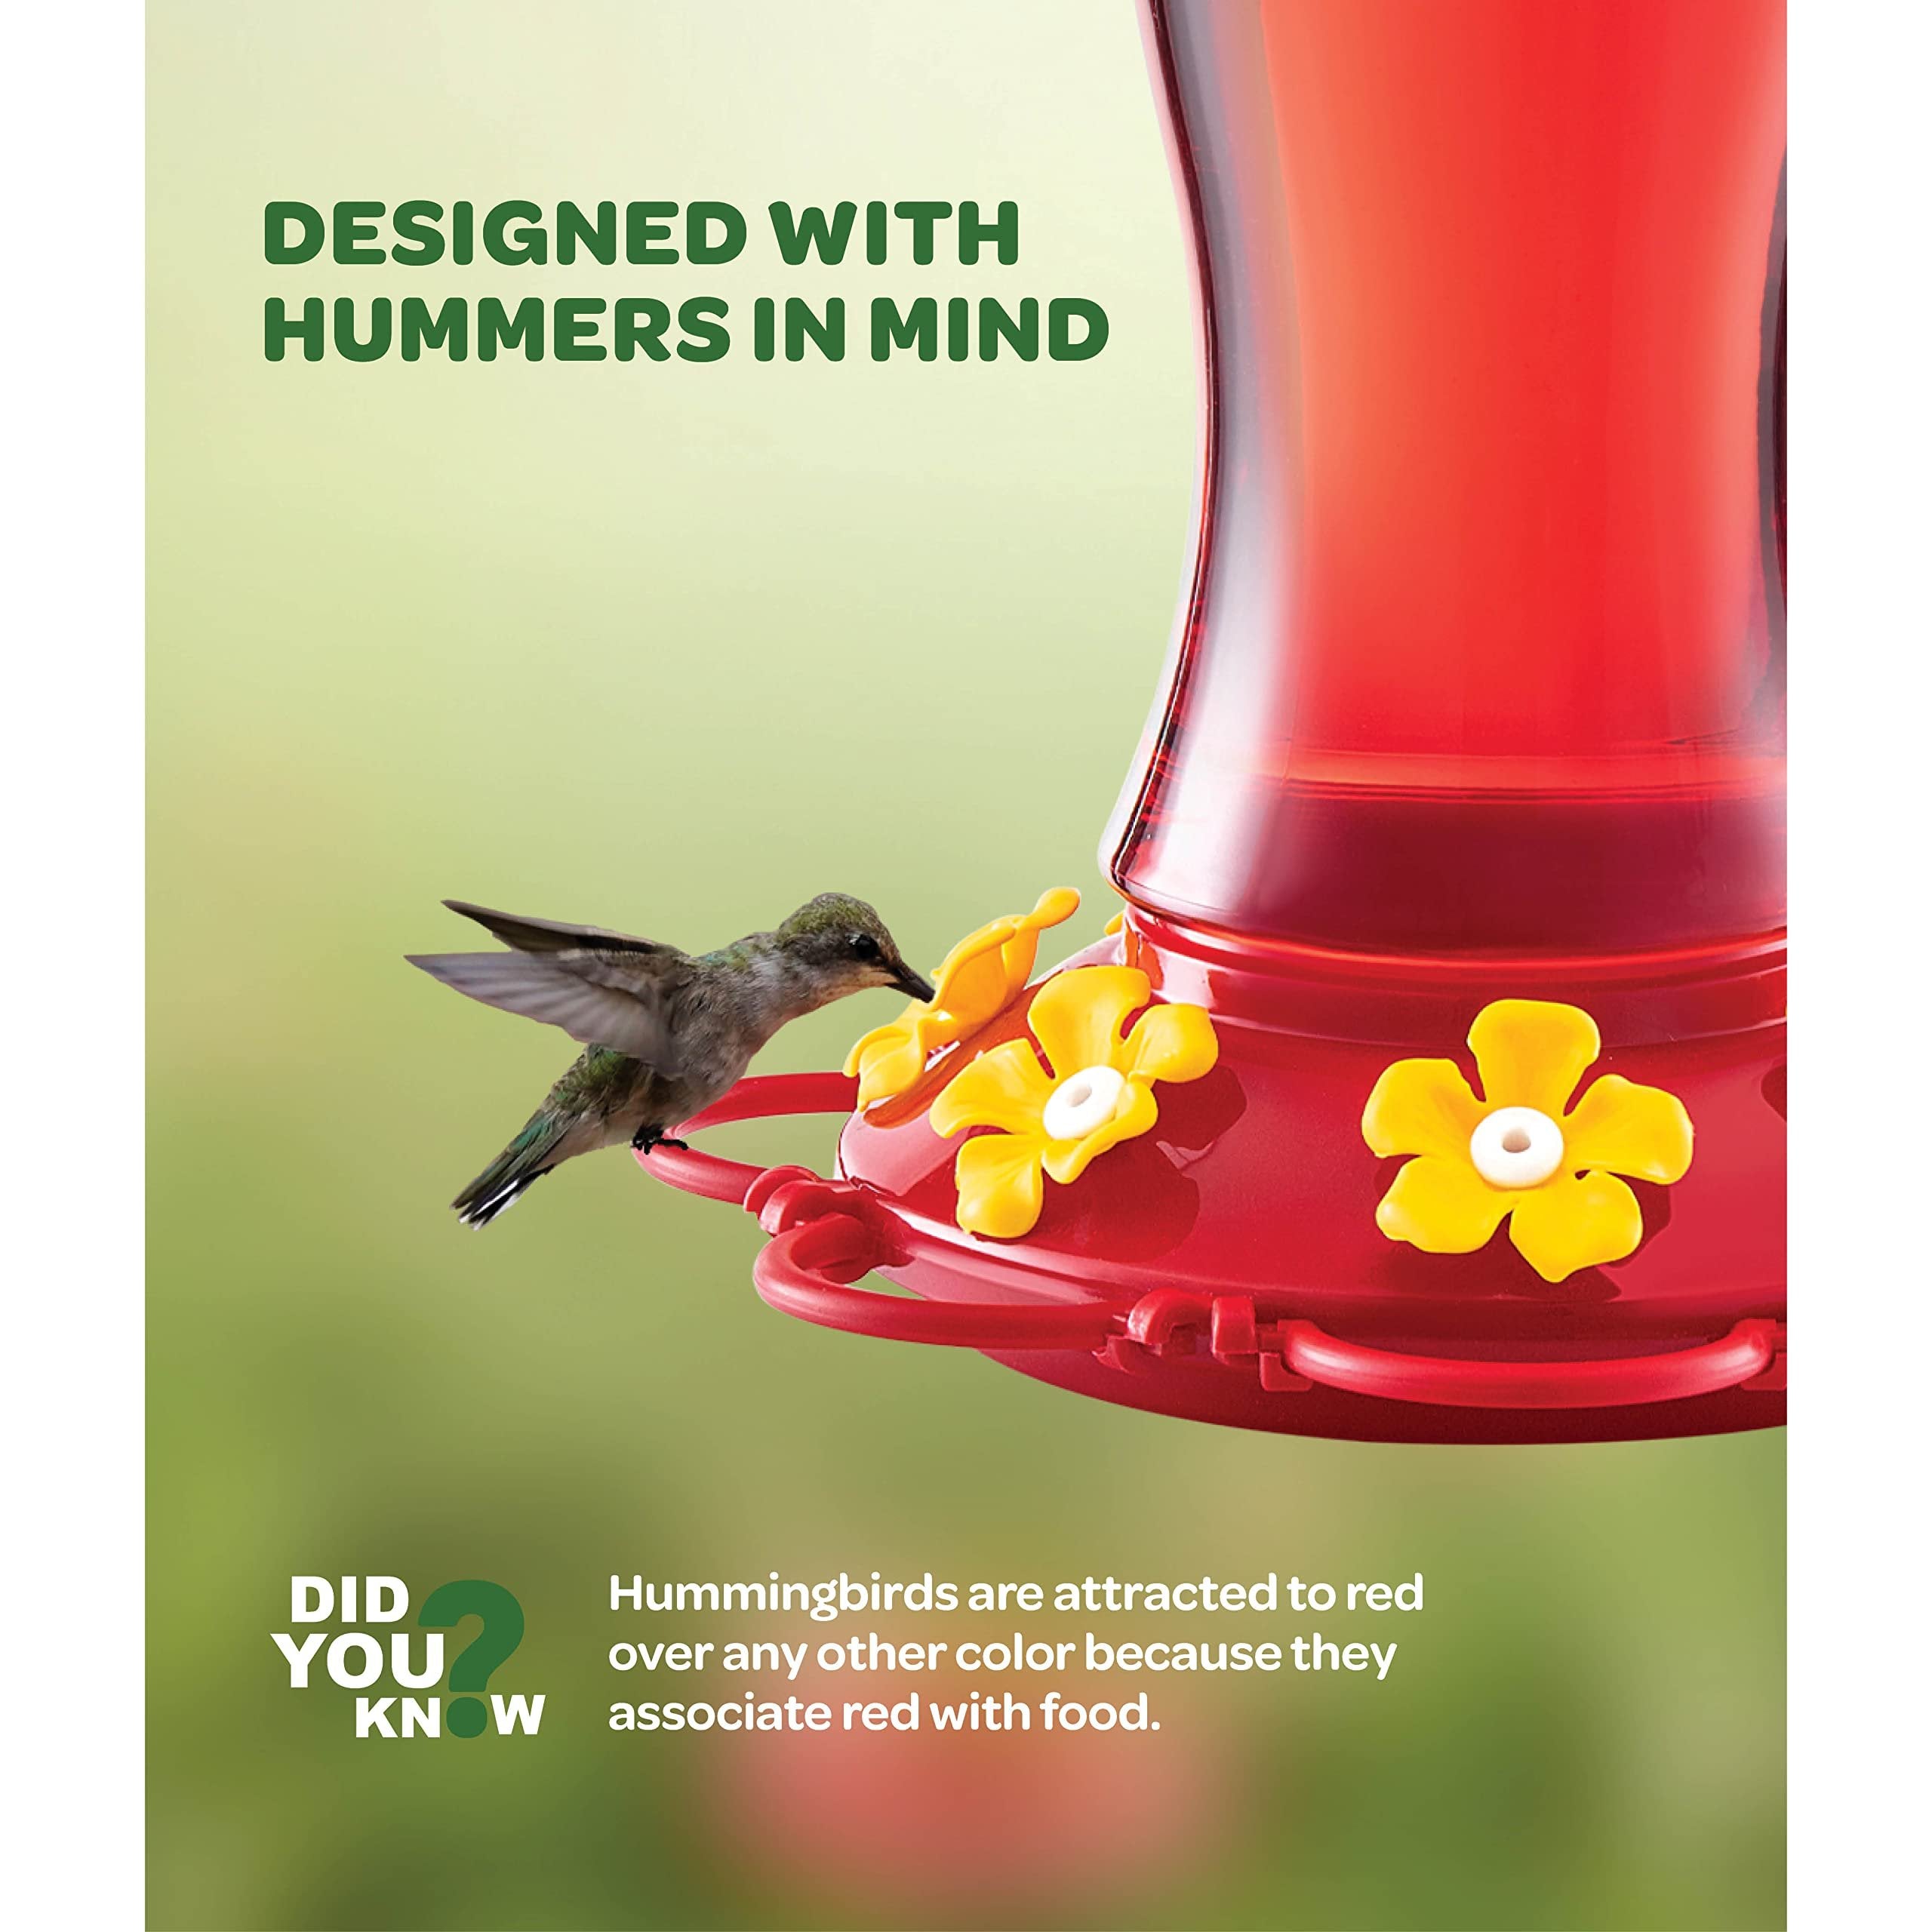 SEWANTA 30oz Red Hummingbird Feeder Set of 2 - Built-in Ant Guard, 7 Feeding Ports, Easy Filling/Cleaning